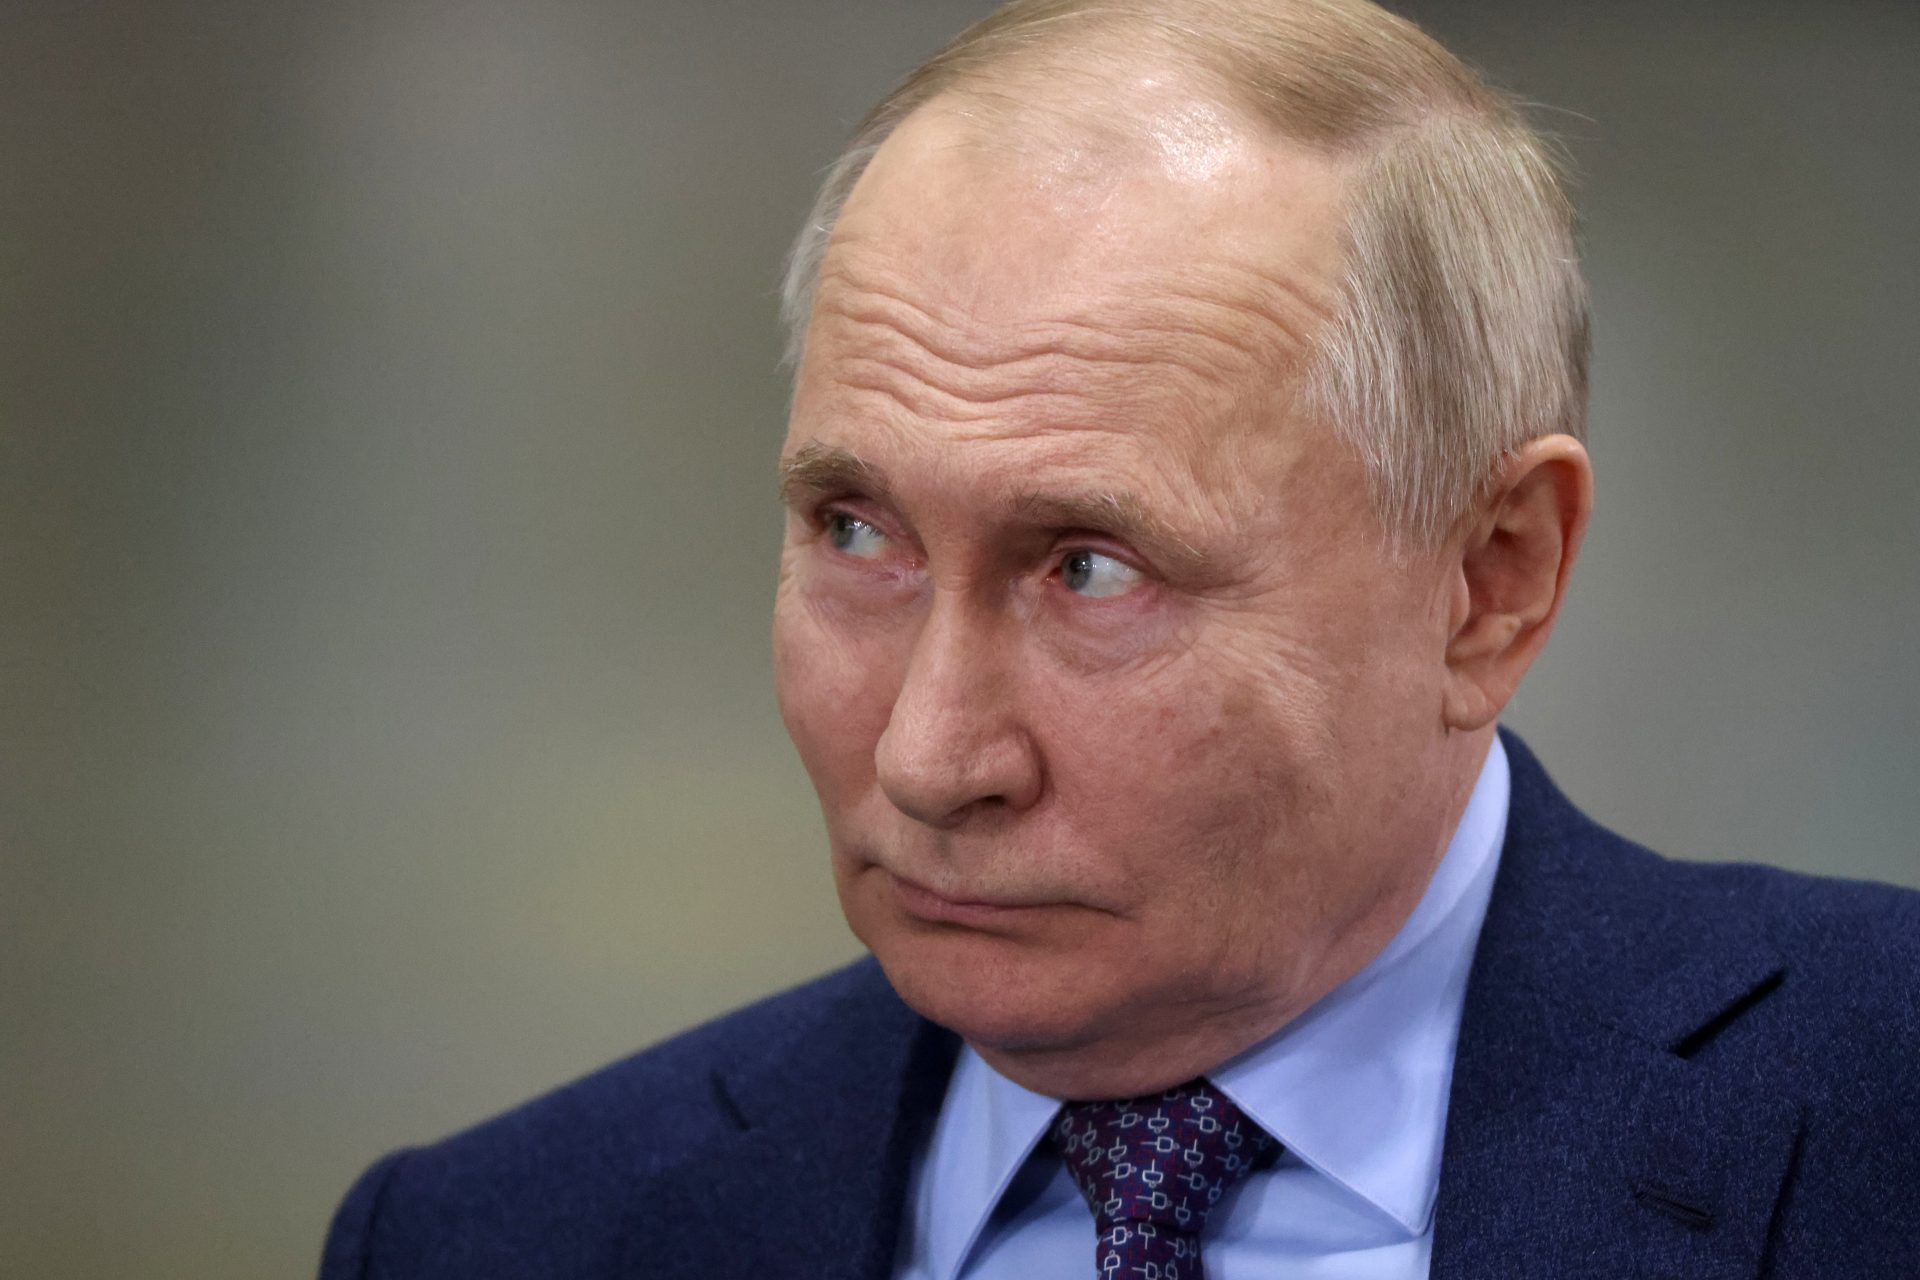 Putin will be allowed to run for president again in 2030 